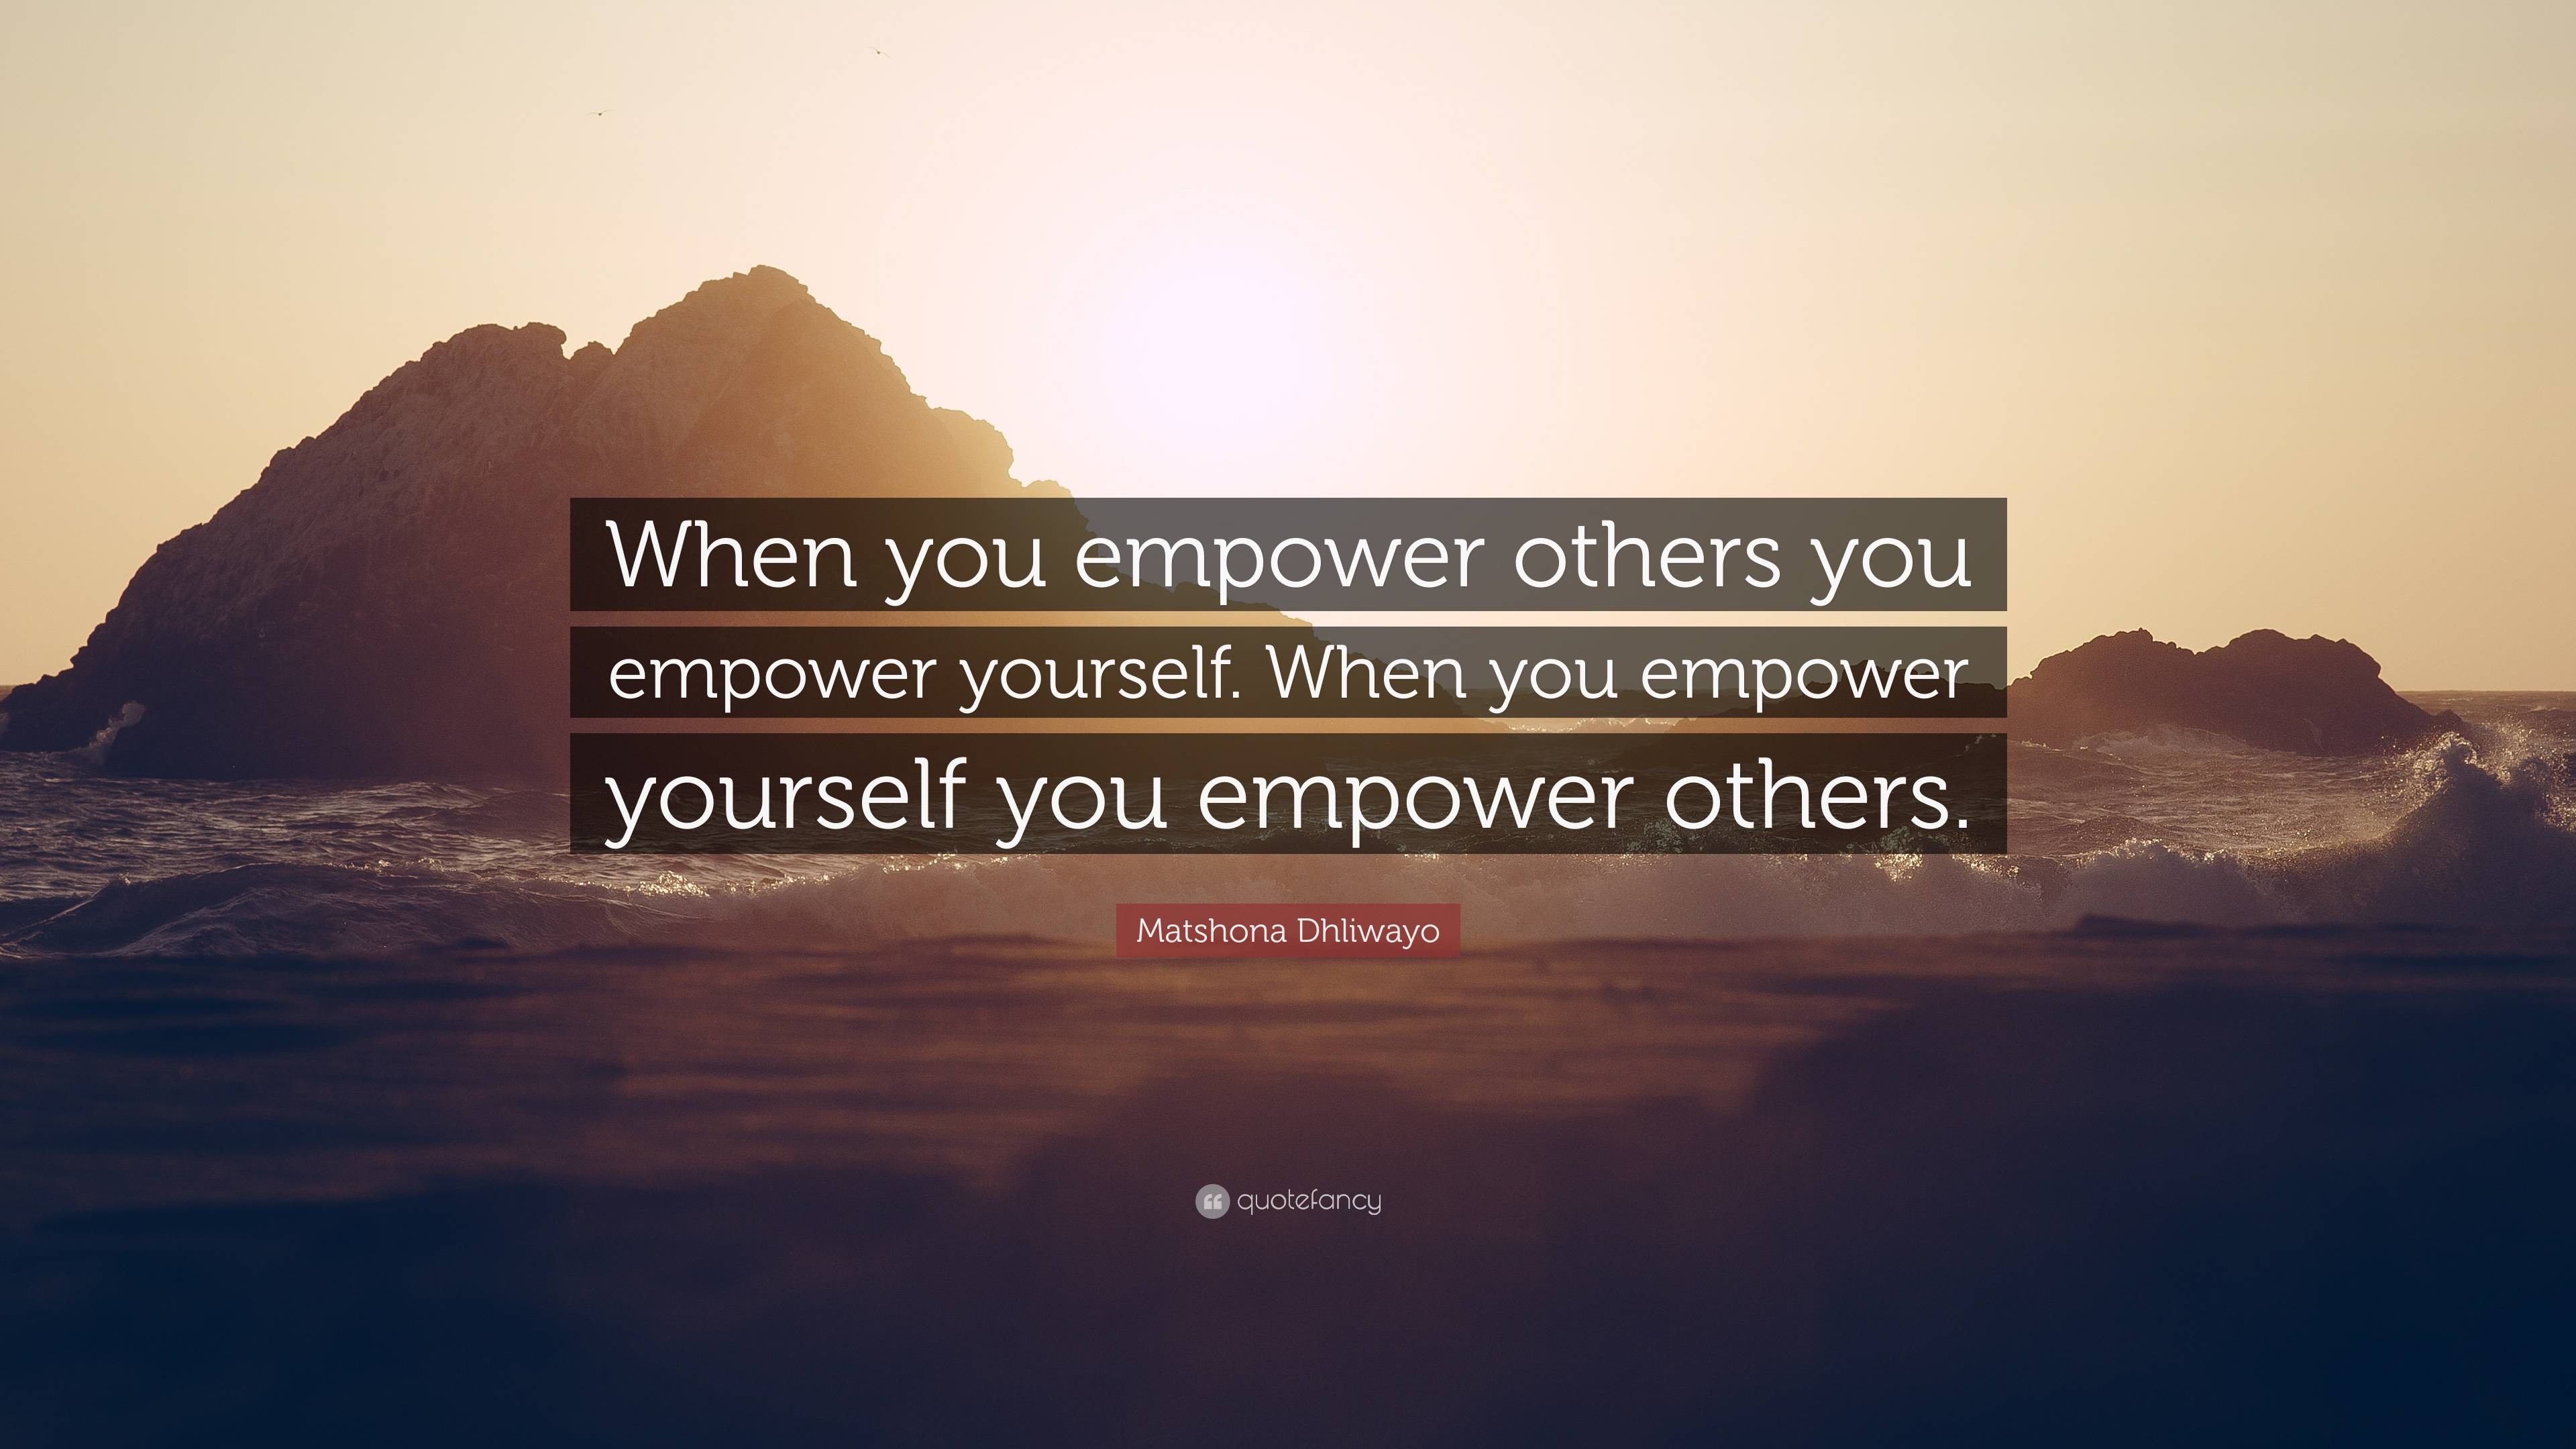 Matshona Dhliwayo Quote: “When you empower others you empower